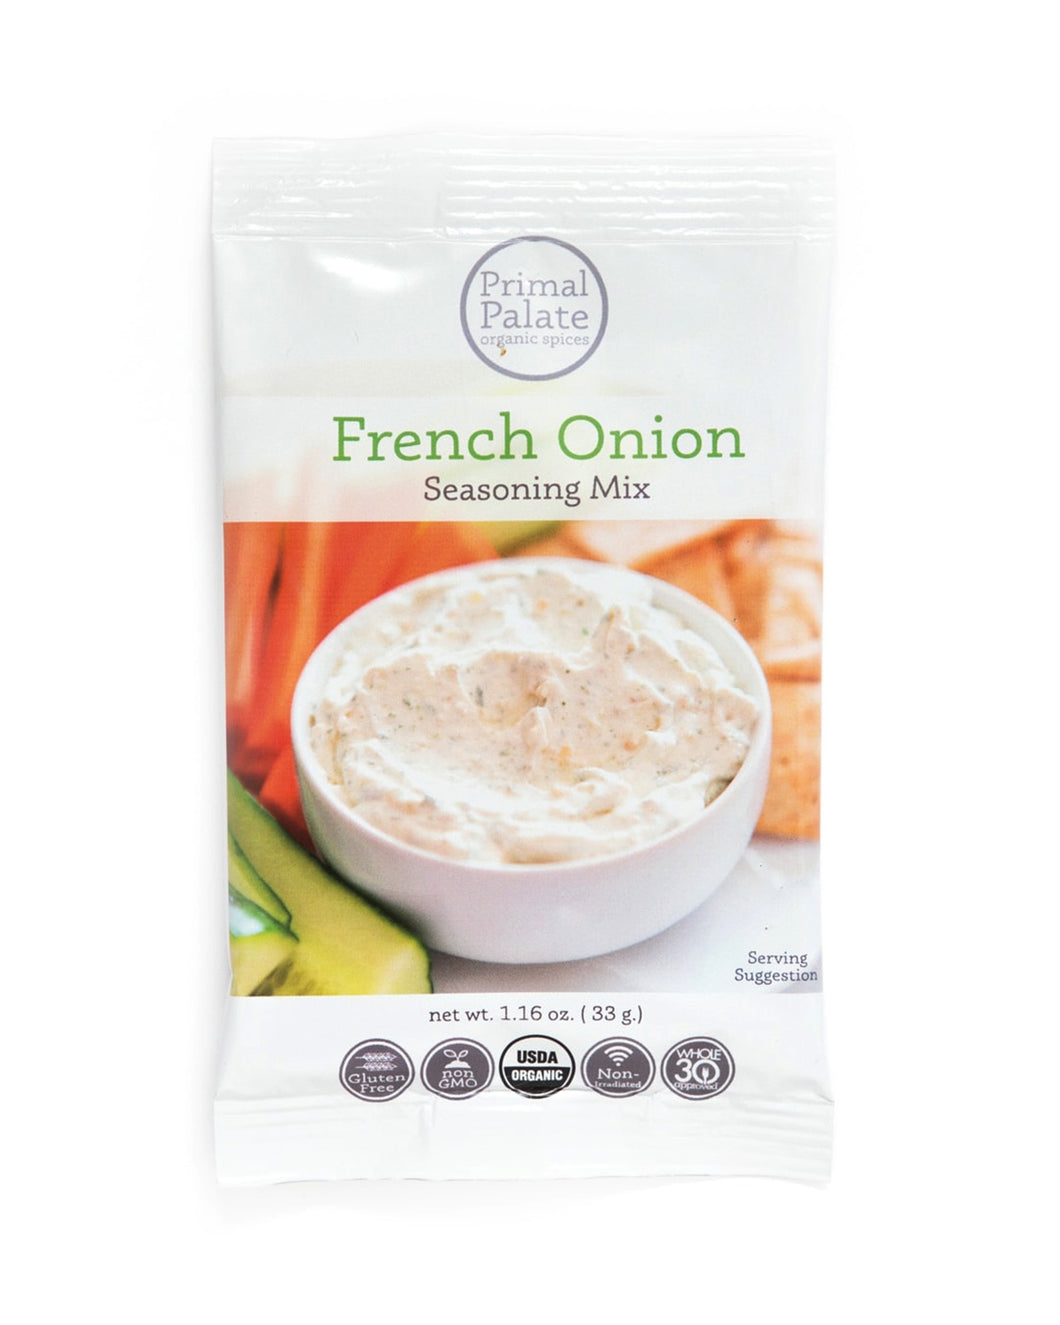 French Onion Seasoning Mix by Primal Palate, 1 packet (1.16 oz)